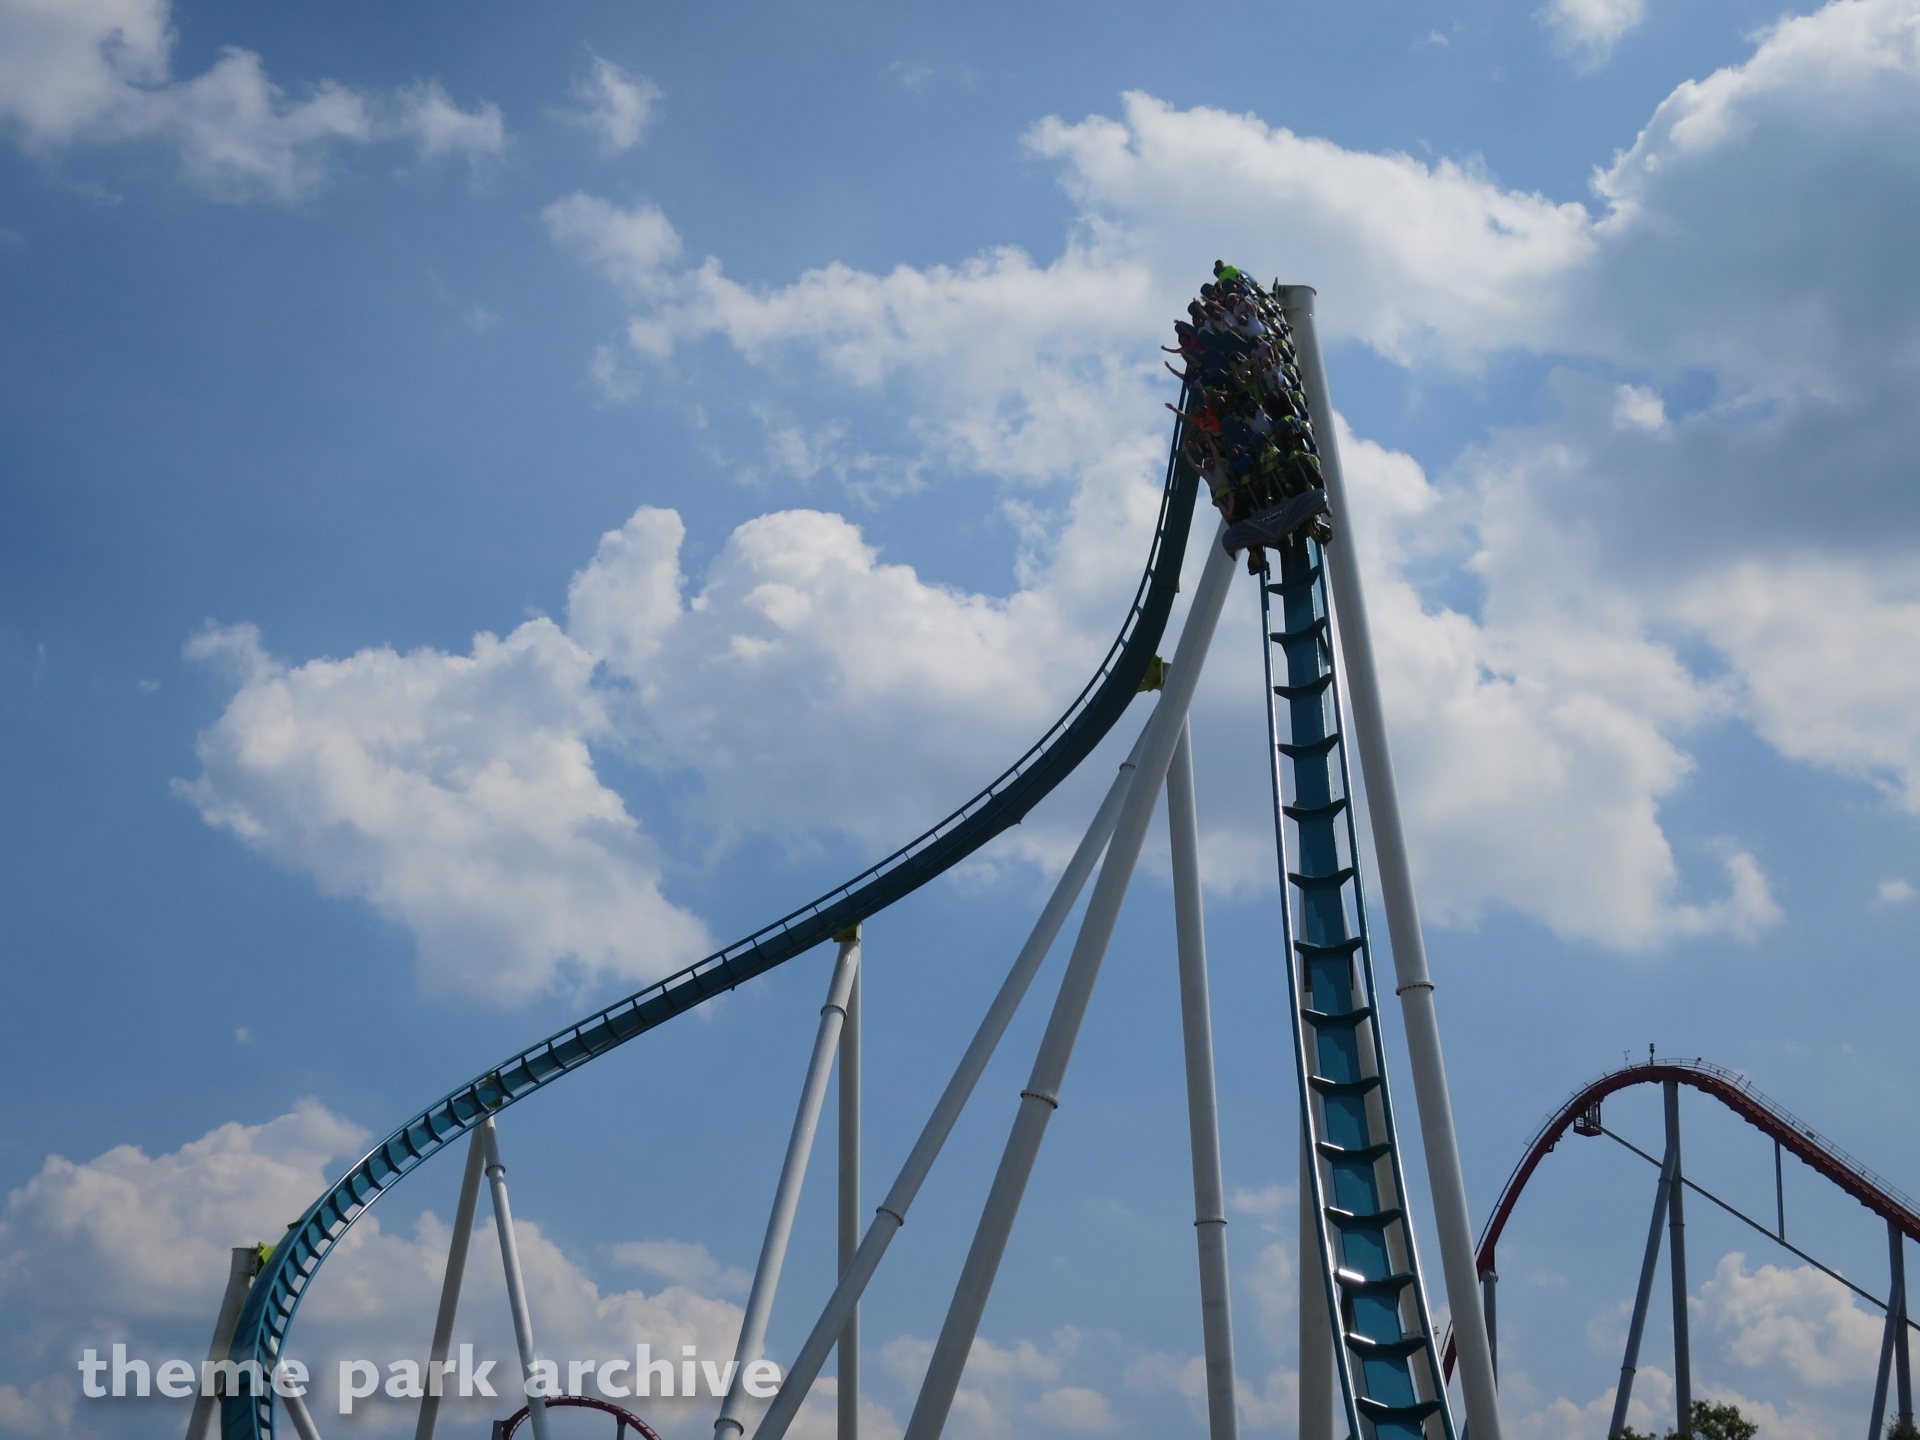 Fury 325 at Carowinds | Theme Park Archive